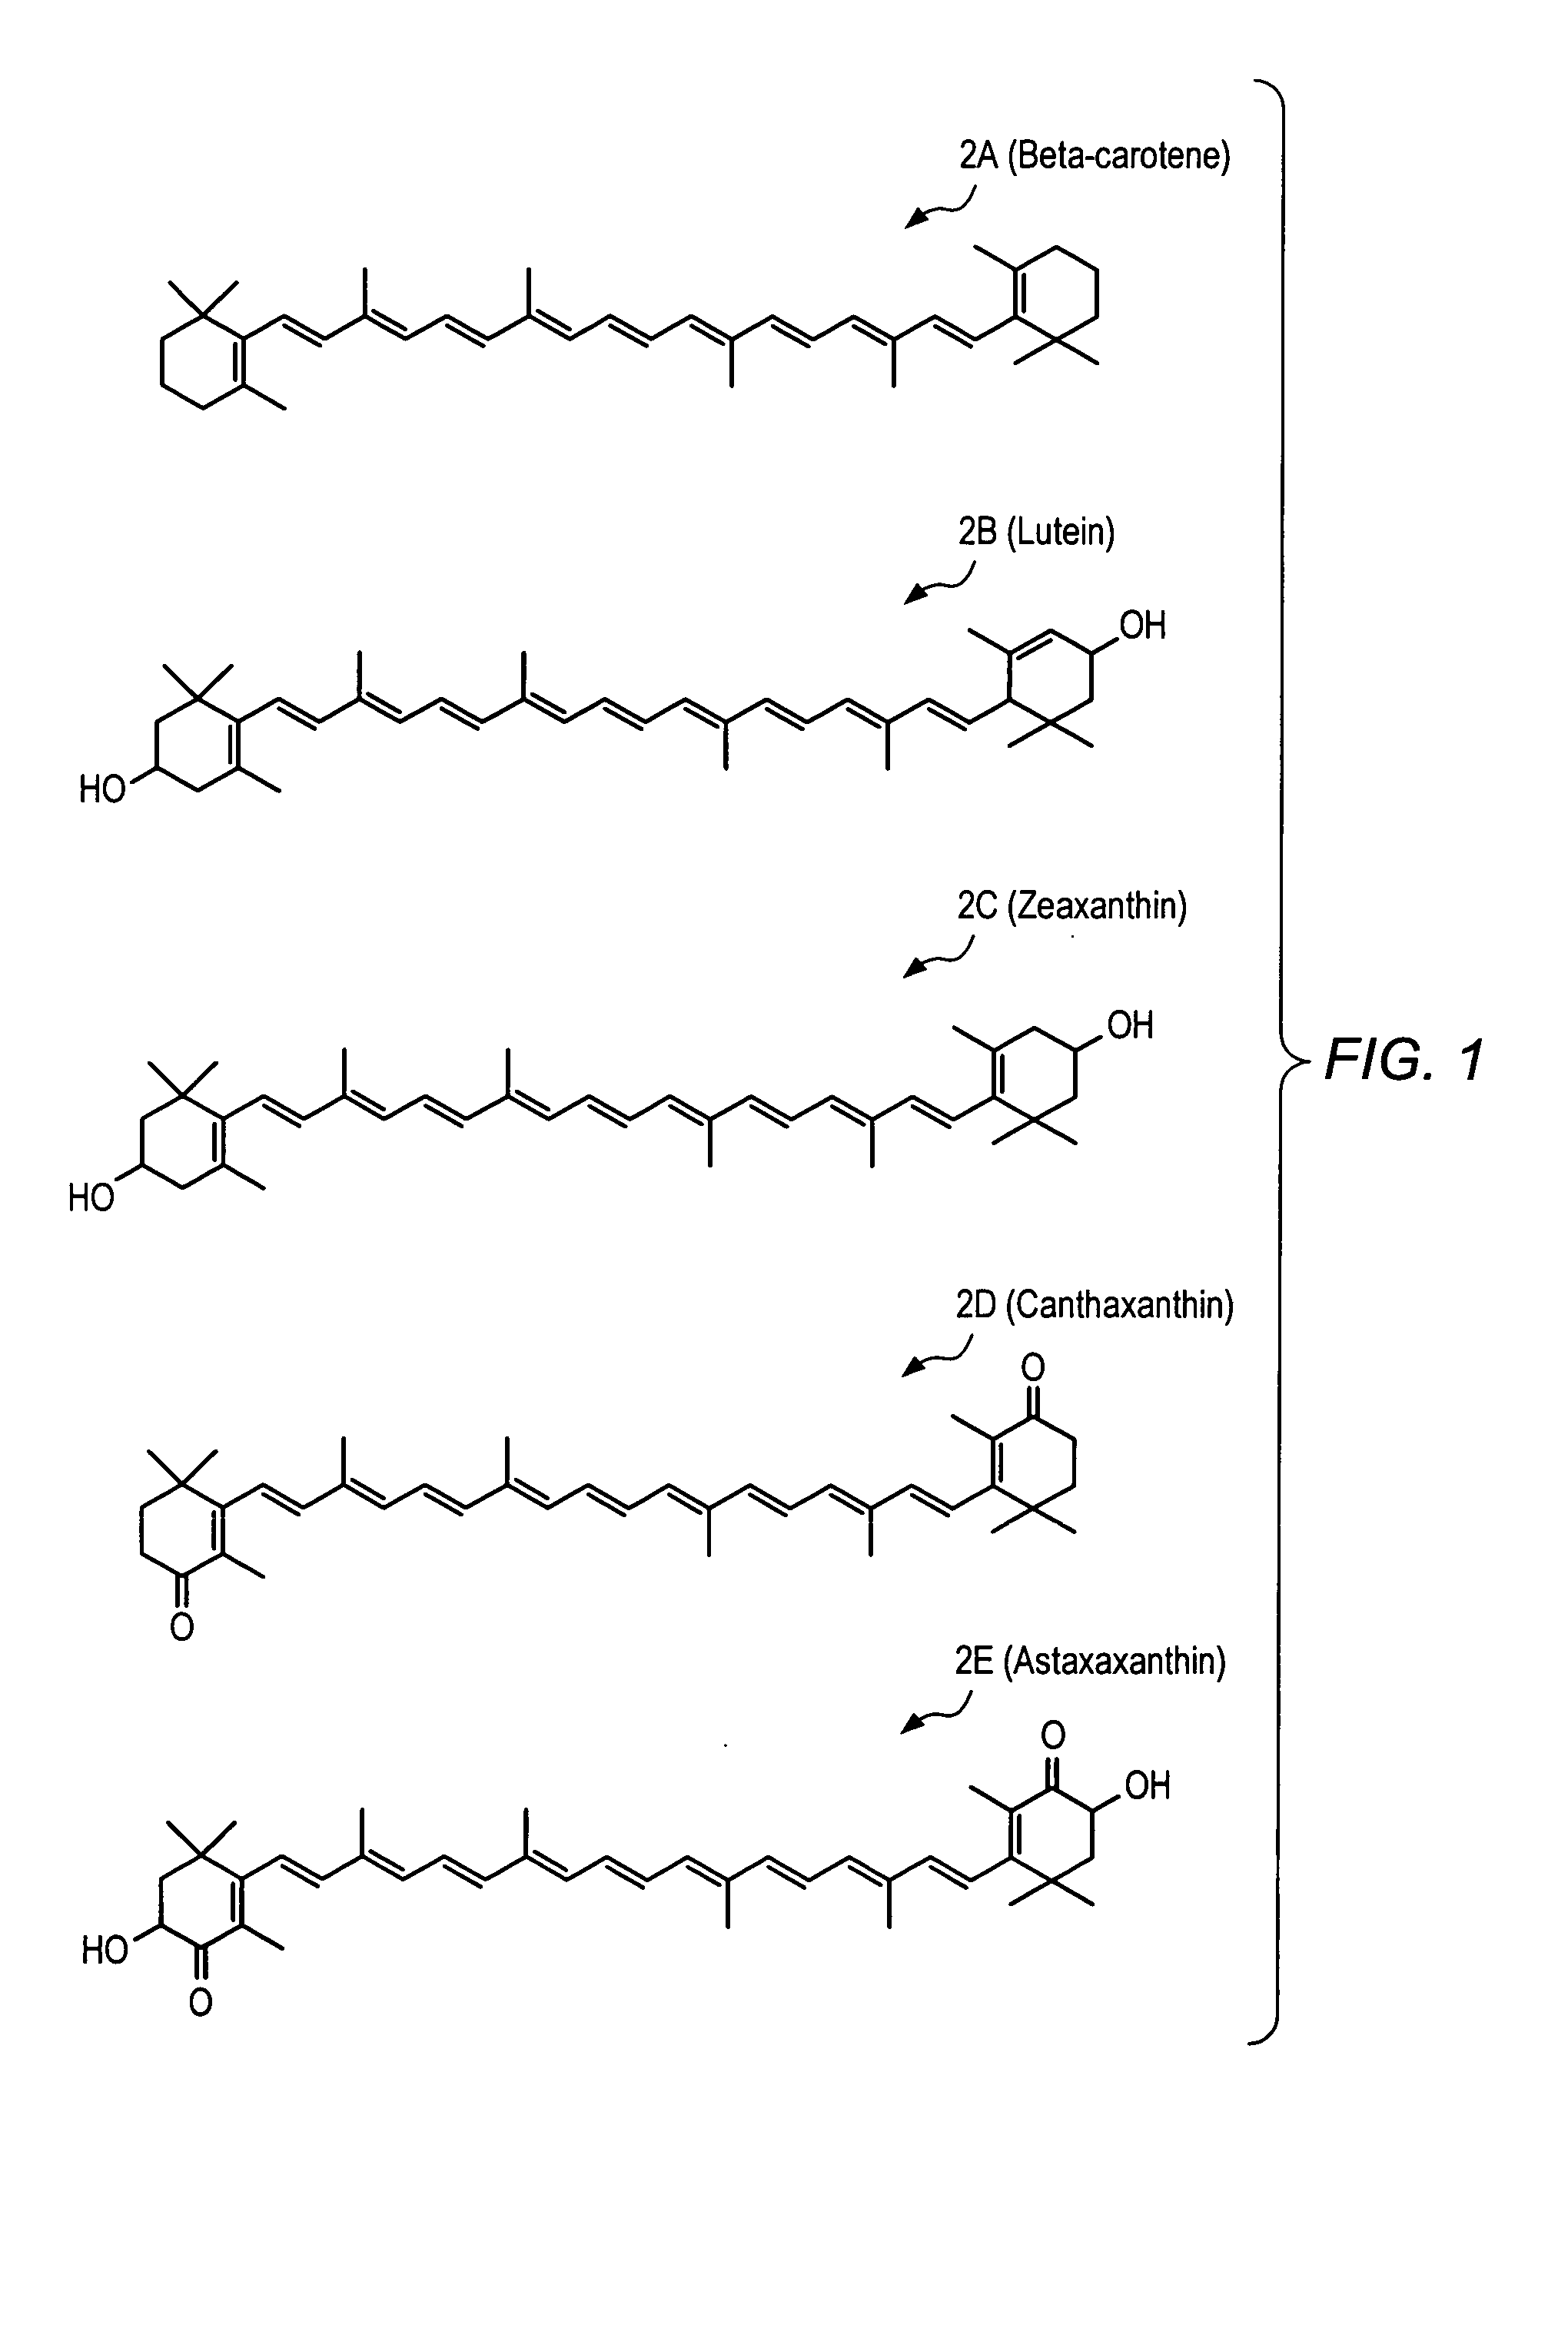 Carotenoid ester analogs or derivatives for the inhibition and amelioration of liver disease